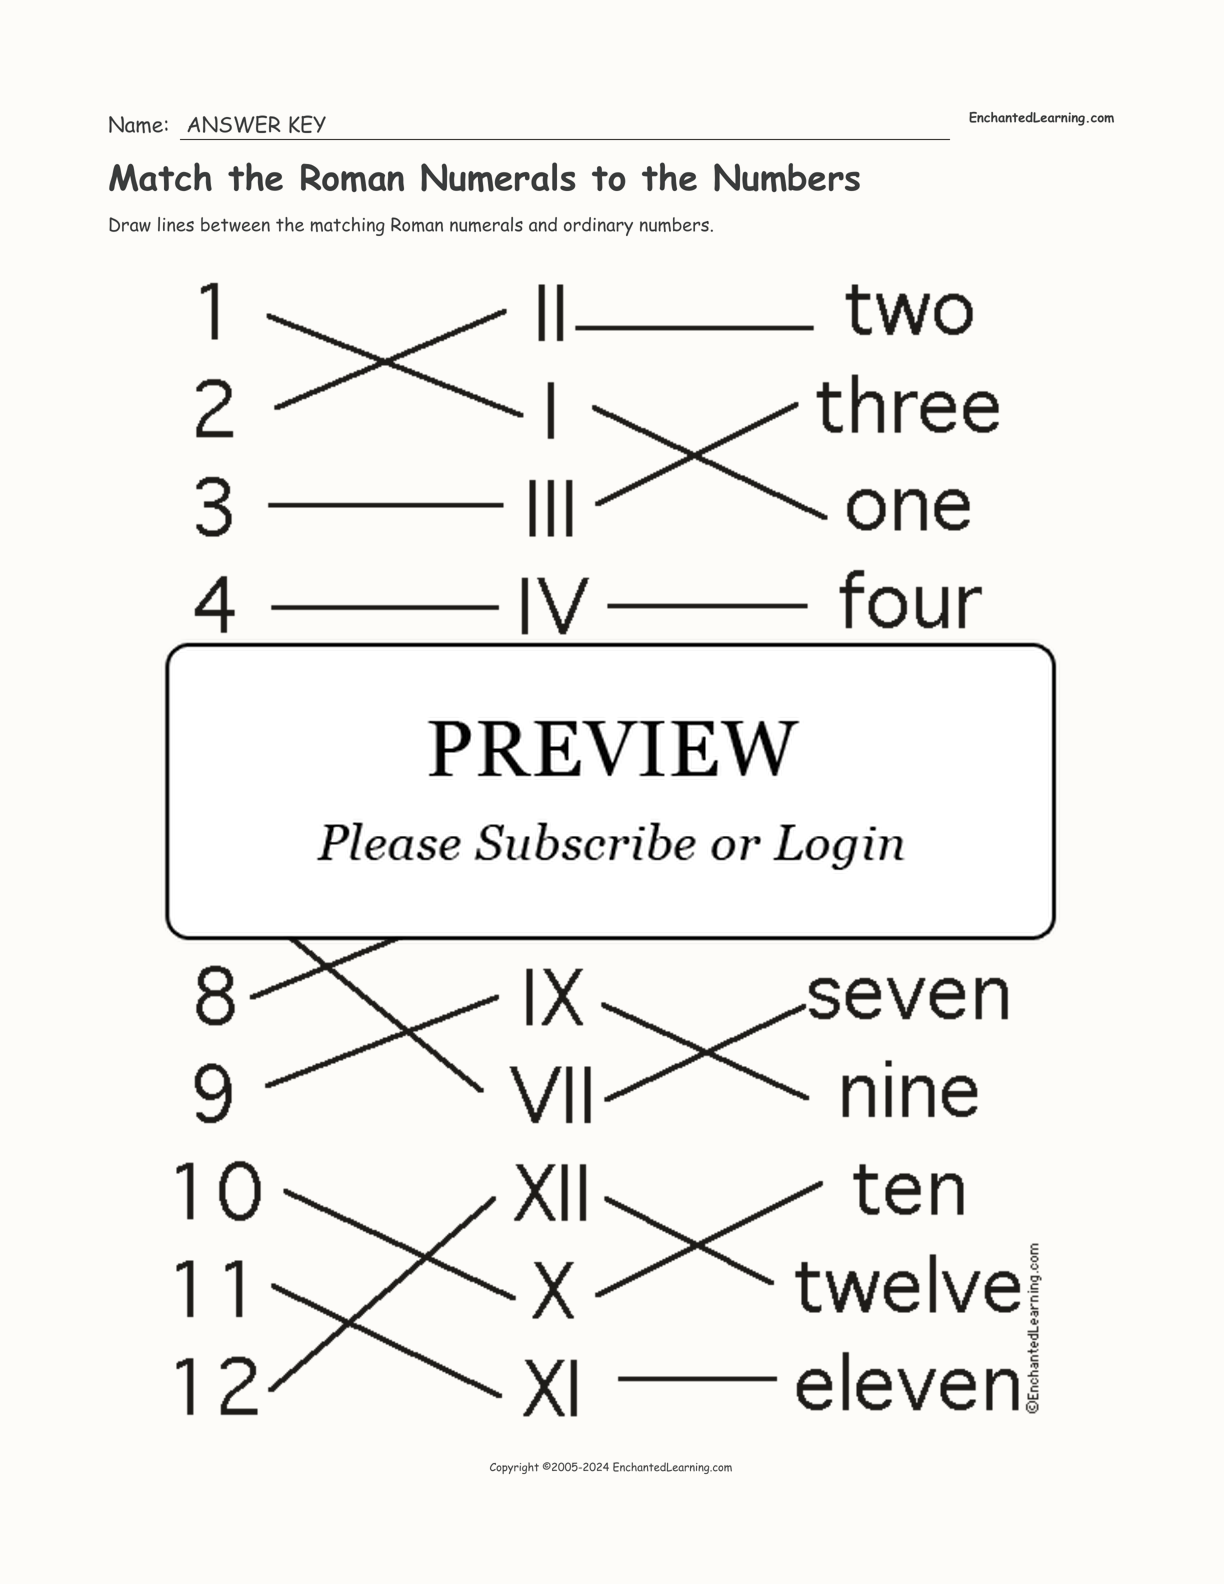 Match the Roman Numerals to the Numbers interactive worksheet page 2